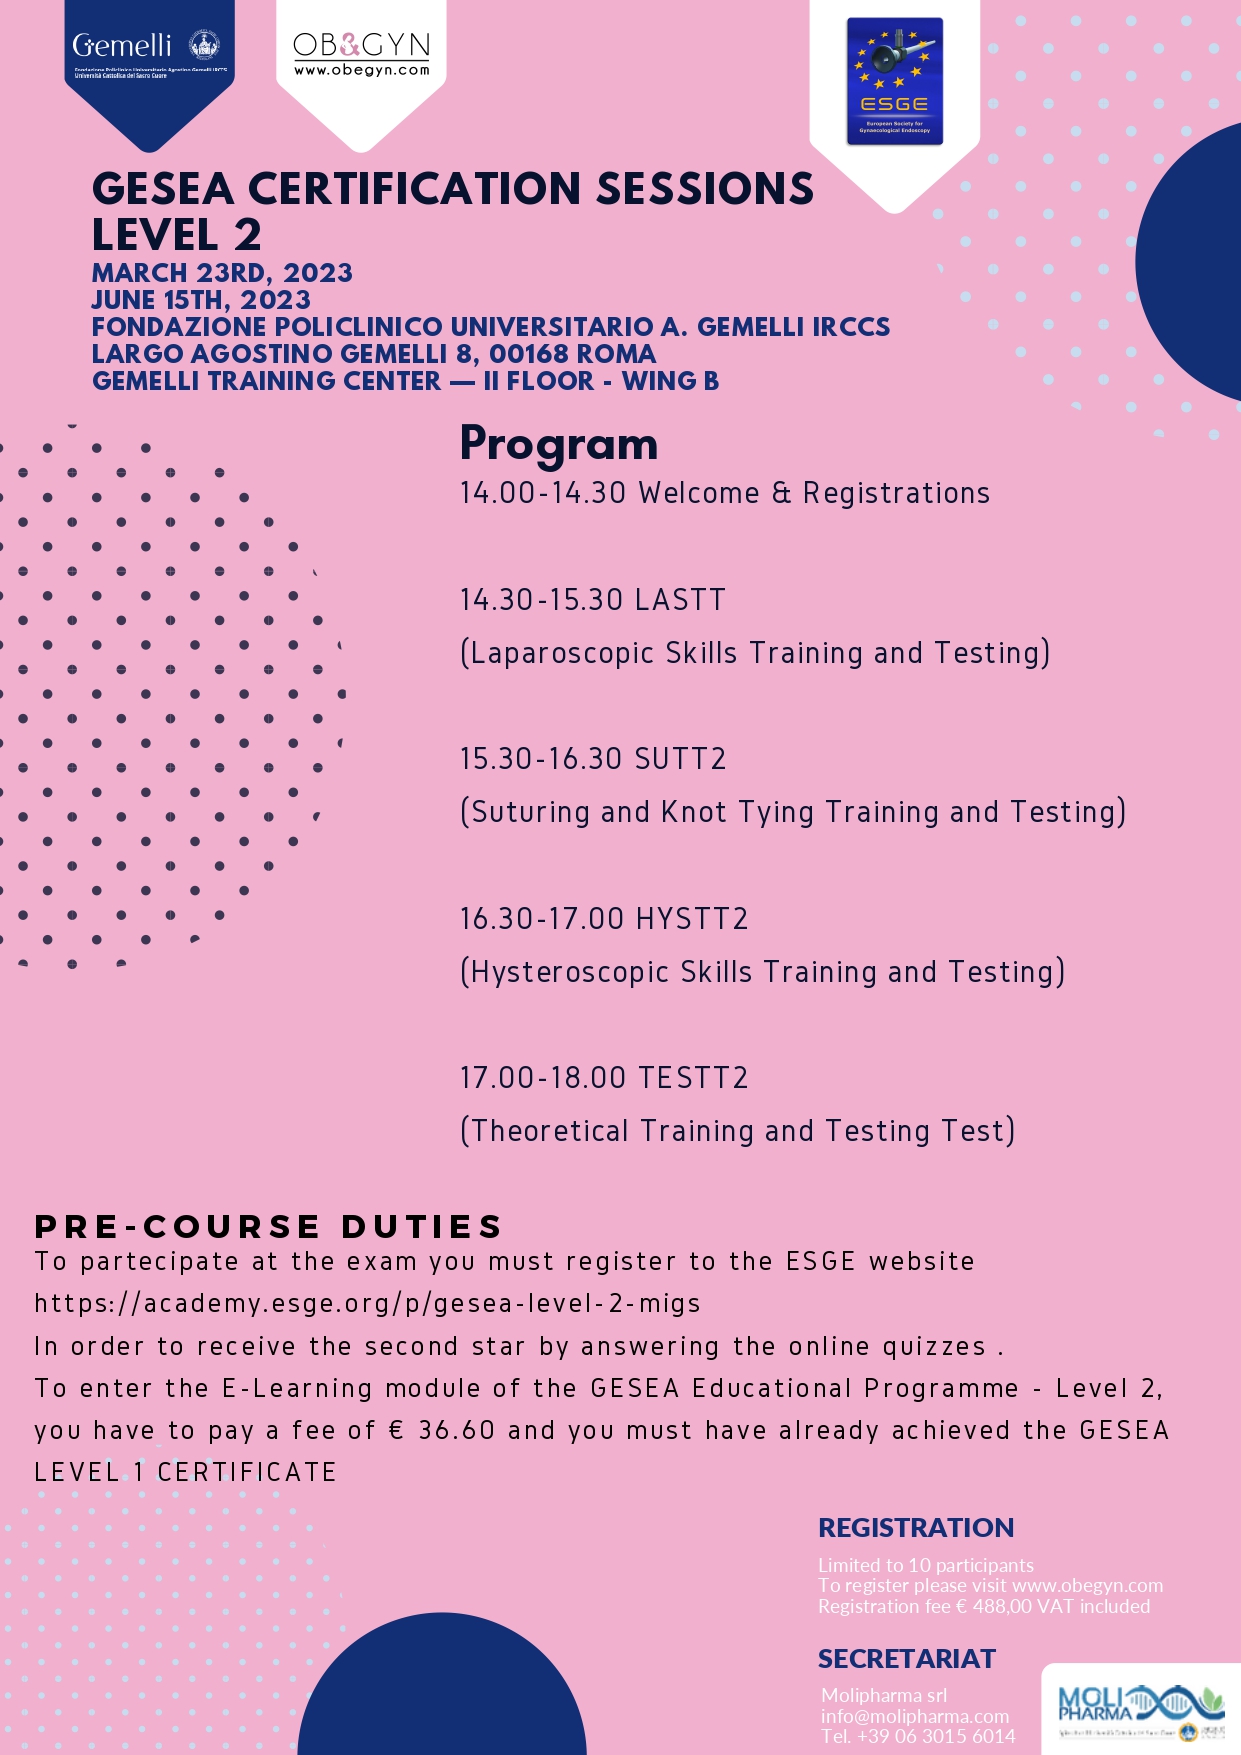 Programma GESEA CERTIFICATION SESSIONS — LEVEL 2 - MARCH 23RD, 2023